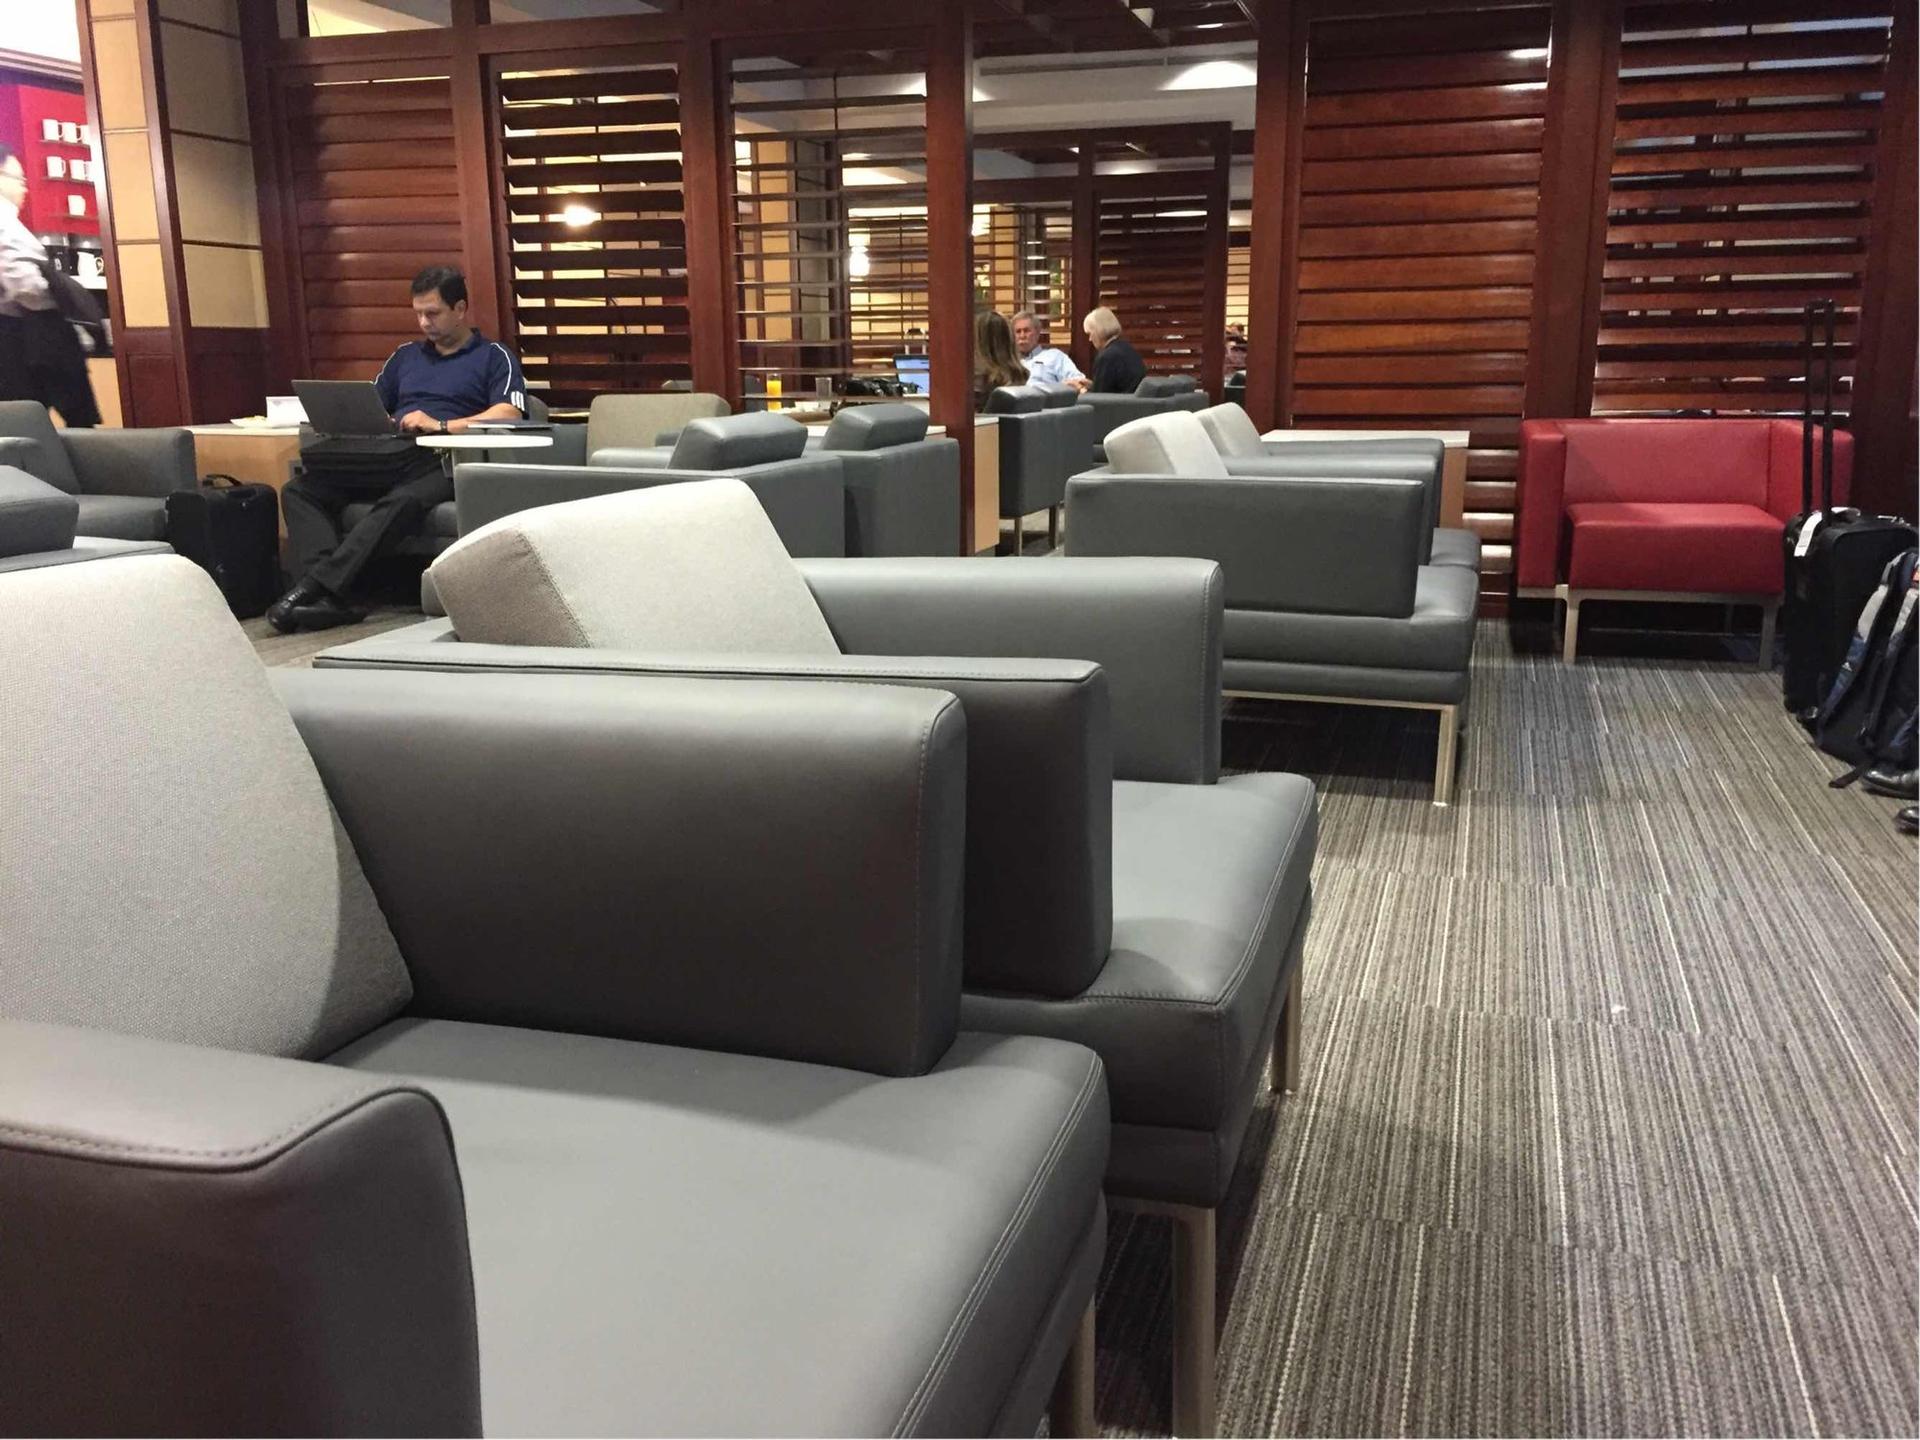 American Airlines Admirals Club image 30 of 32